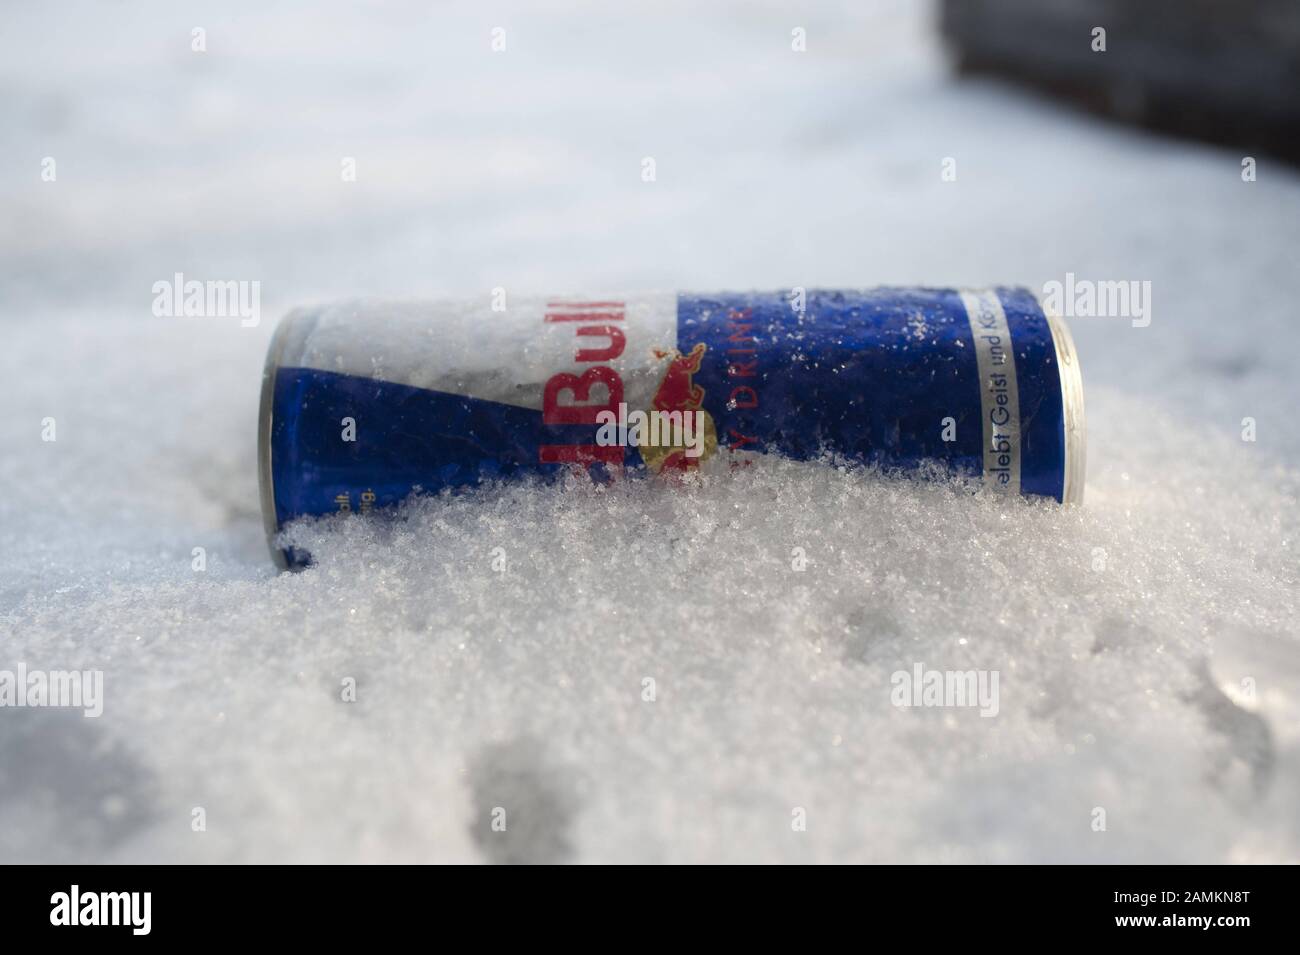 A Red Bull can lies in the snow, symbolic image of the Red Bull Crashed Ice Contest in Munich's Olympic Park [automated translation] Stock Photo